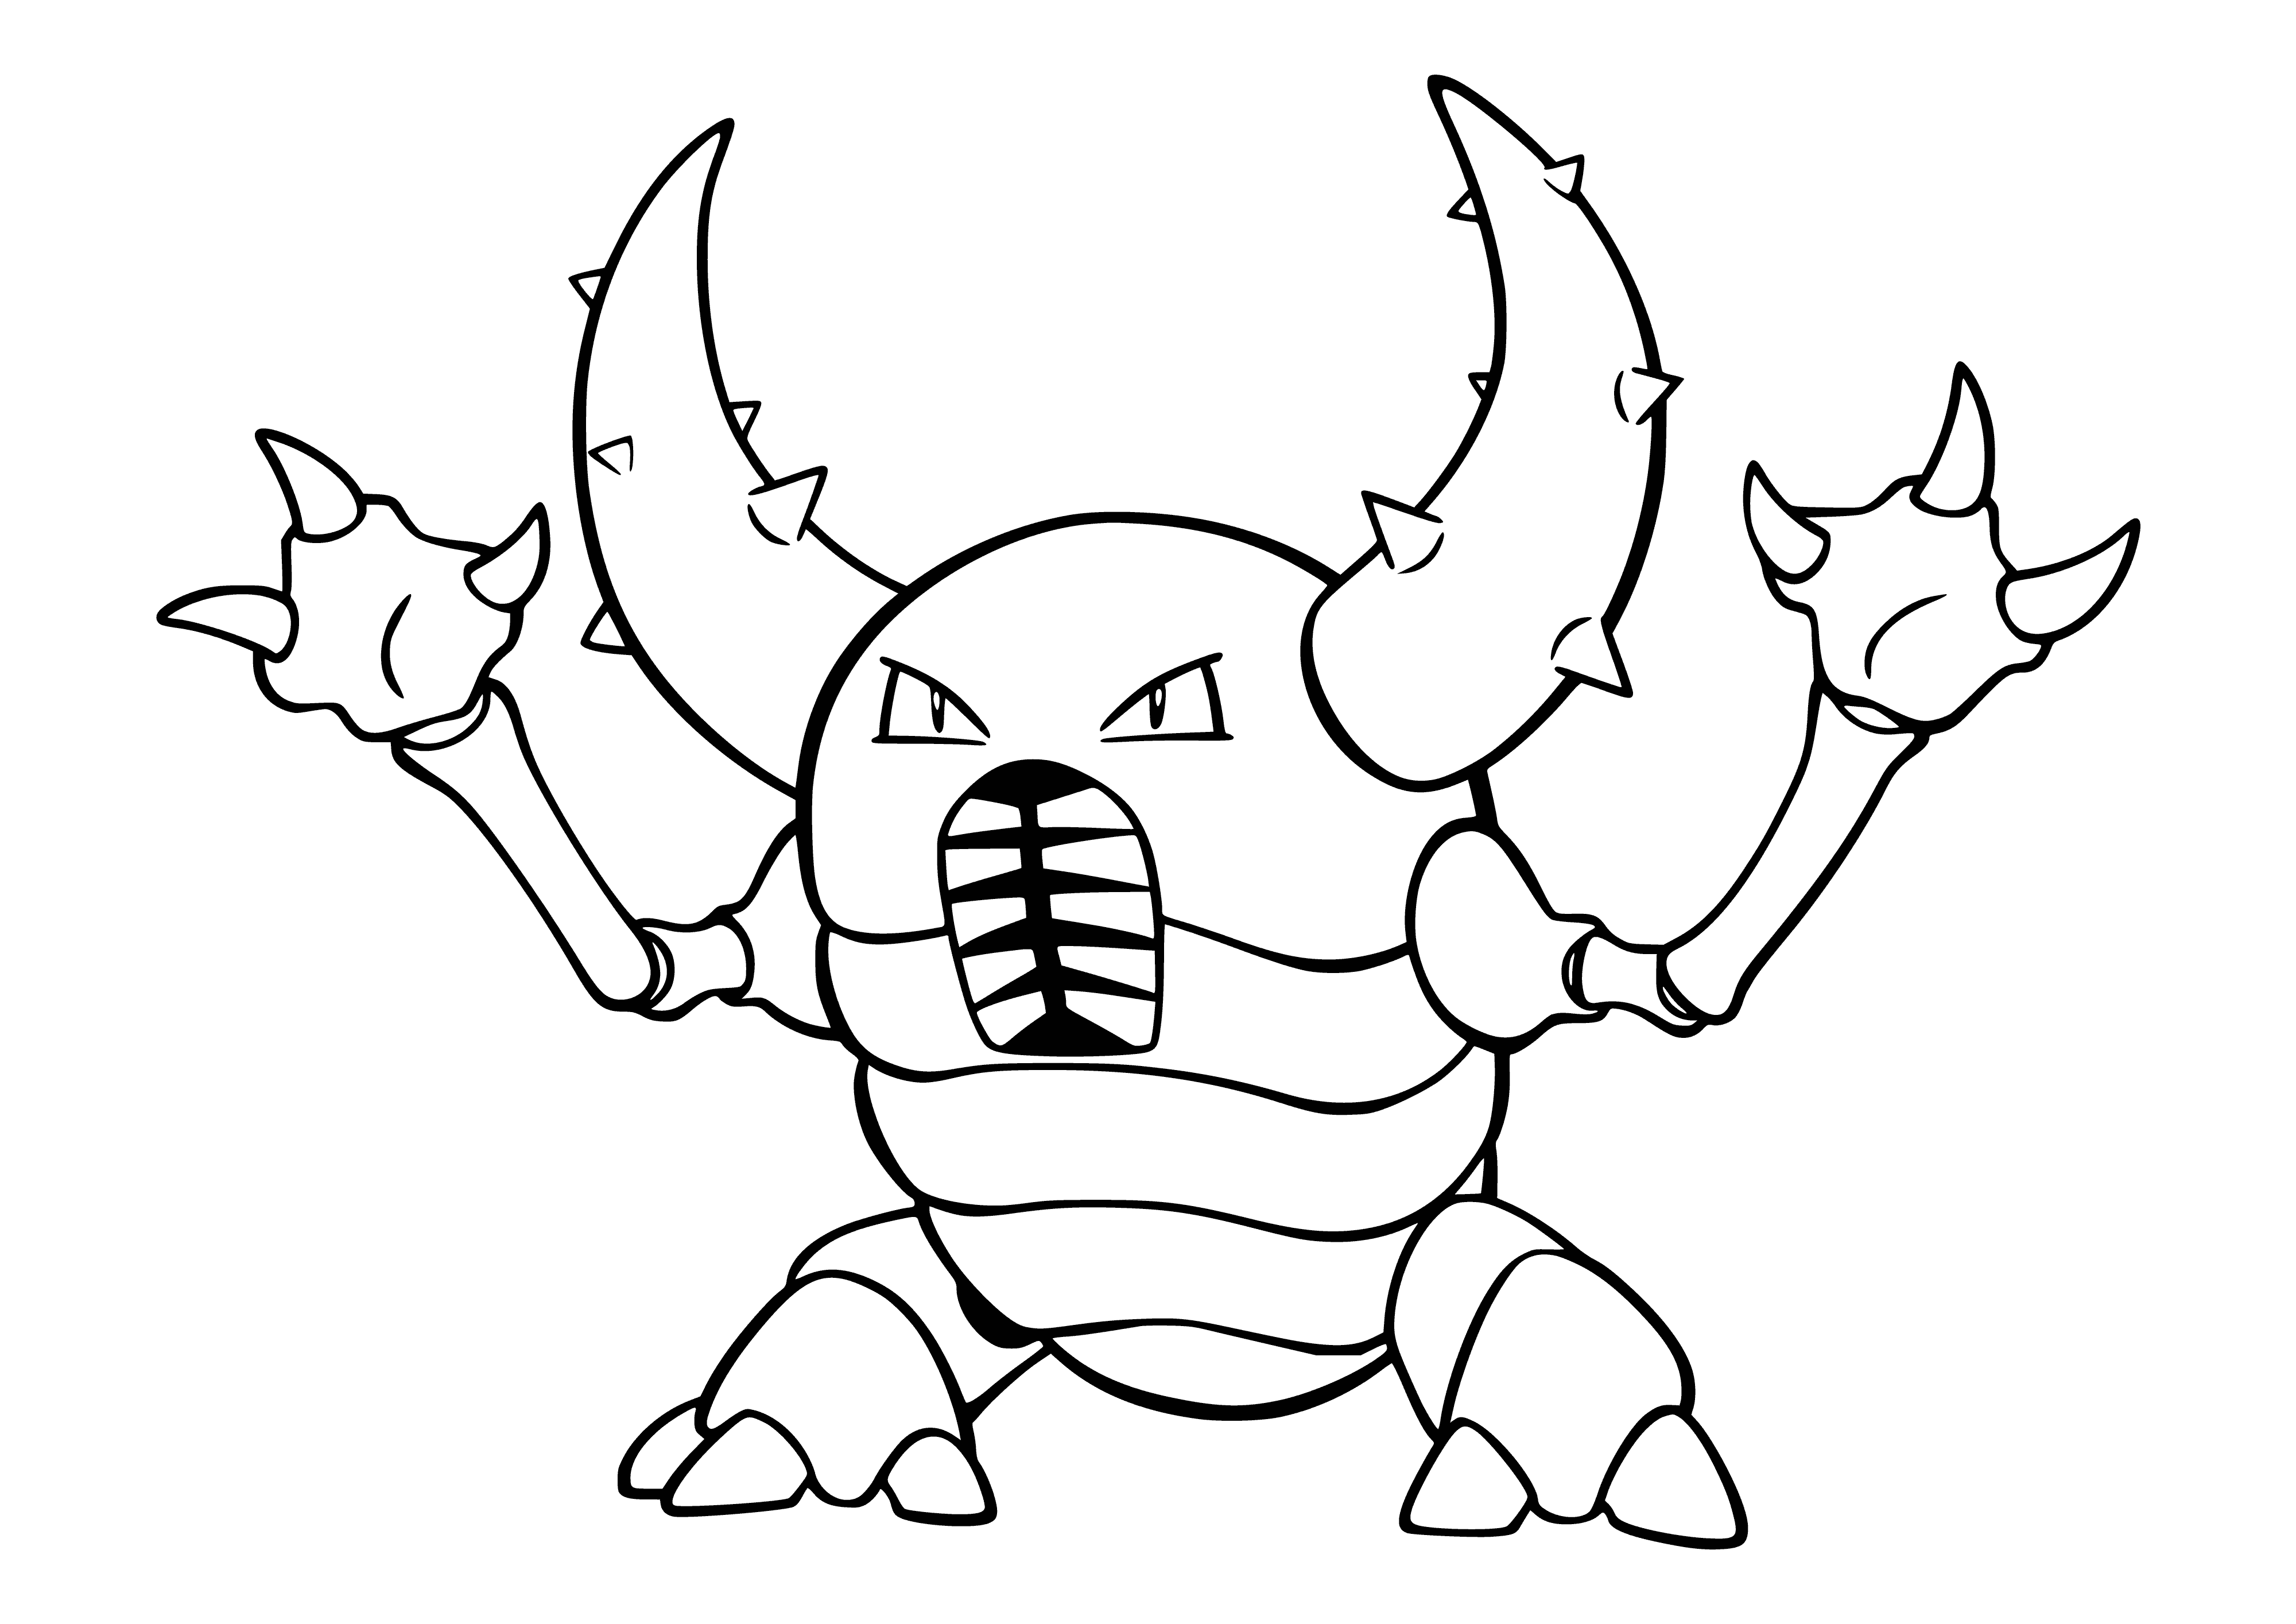 coloring page: Pokemon Pinsir is a large brown beetle-like Pokemon with 2 large pincers, 2 wings, red eyes, & a small black mouth.